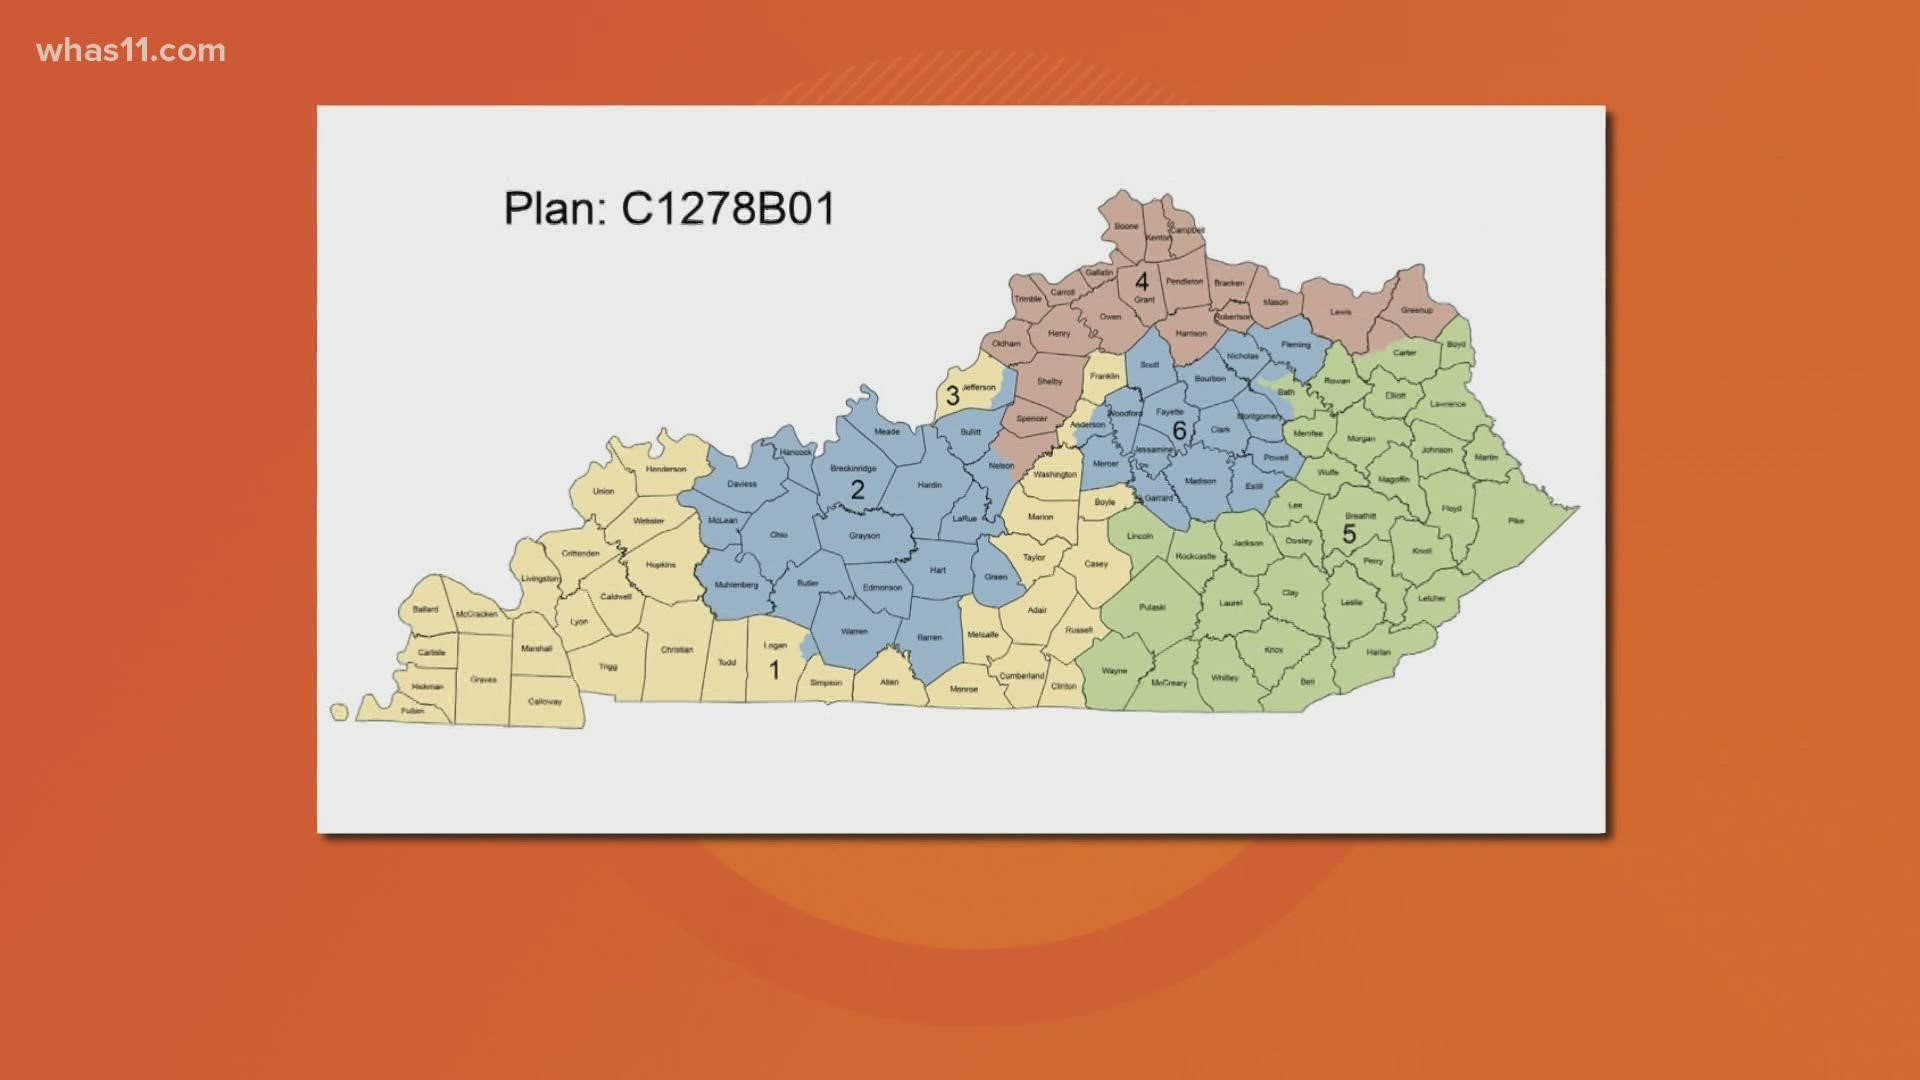 Wednesday night, Gov. Beshear vetoed the redistricting maps and said they were gerrymandering. Thursday afternoon, GOP did an override of the veto.